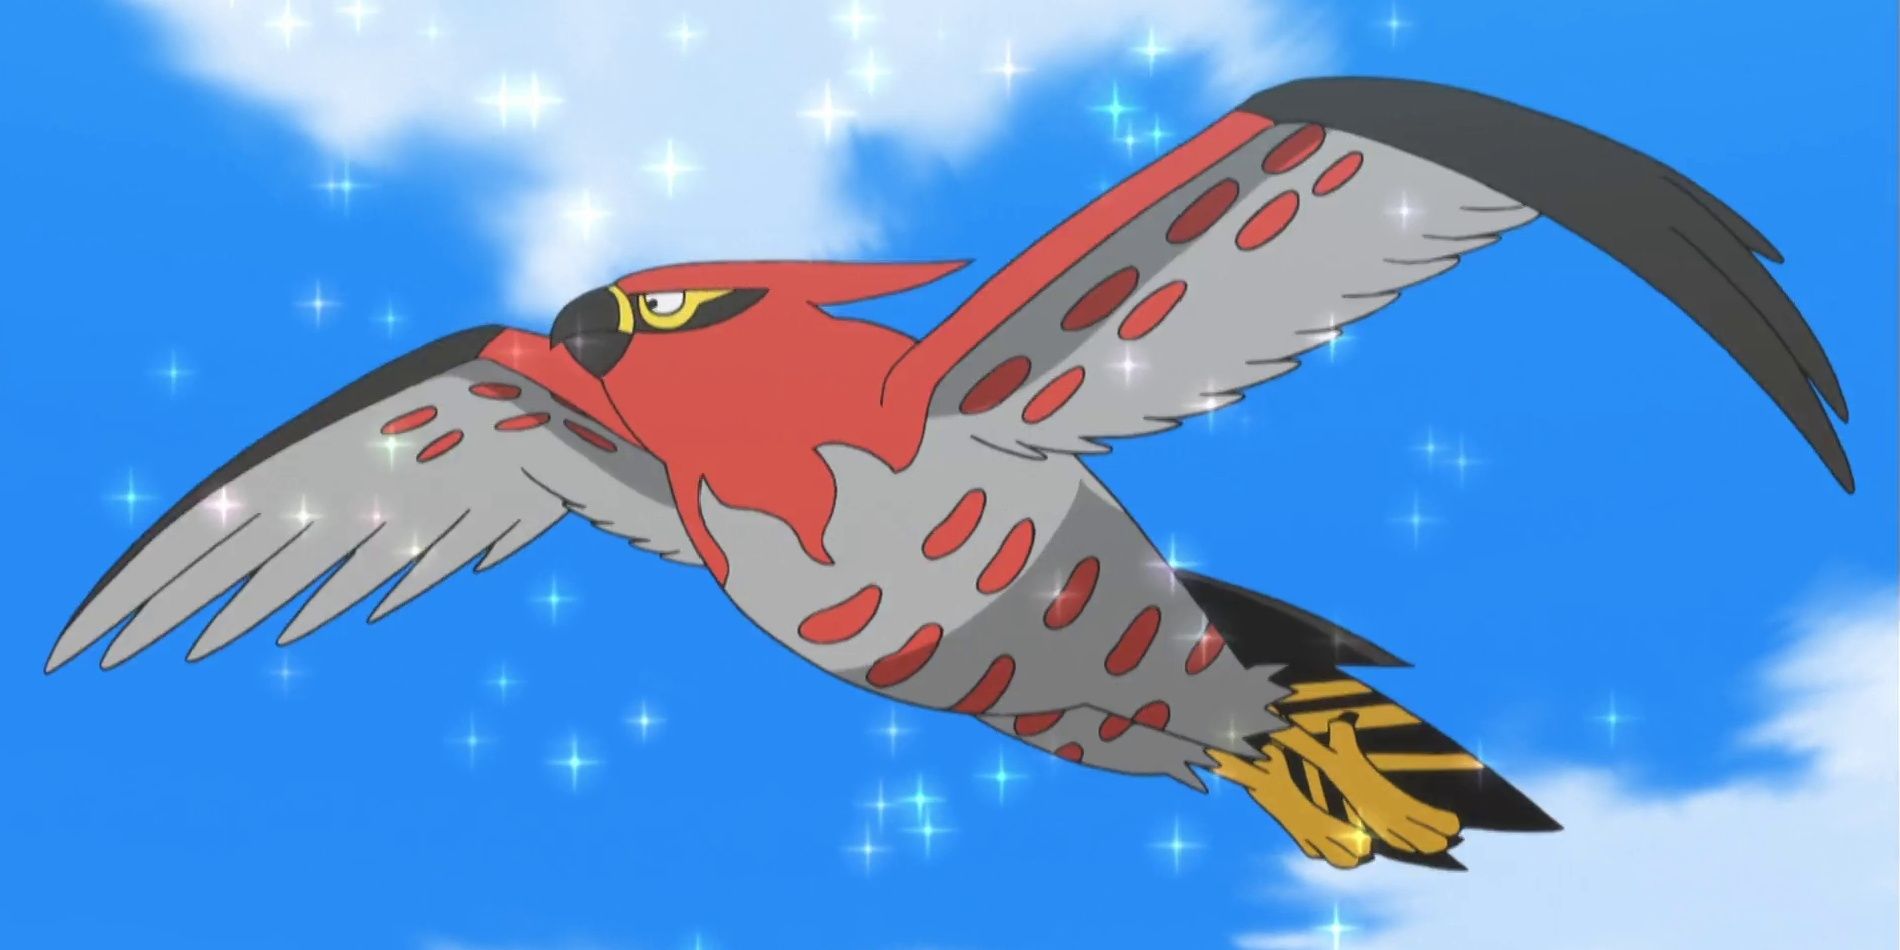 Talnoflame as it appears flying in the sky from the Pokemon Anime